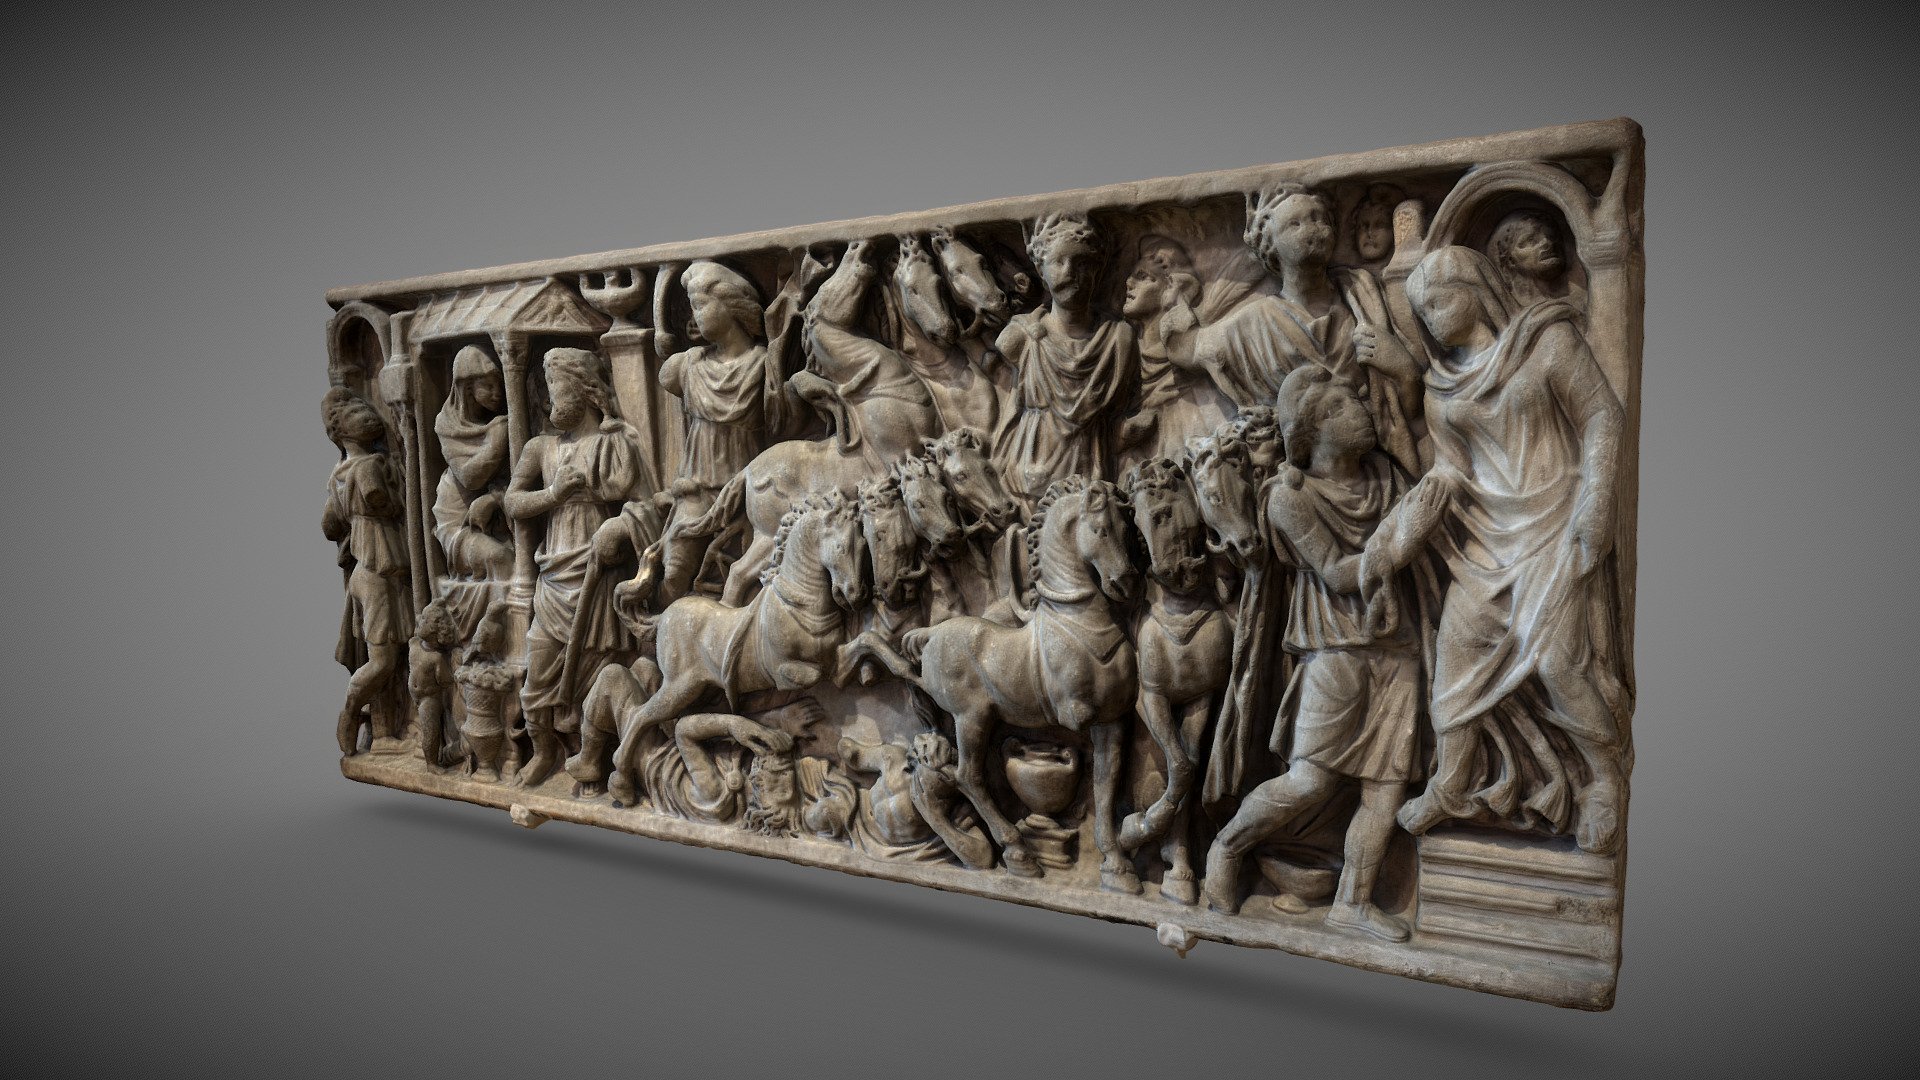 Front part of a sarcophagus, Severe period (ca. 200), Rome (?), Marble. Musée d’Art et d’Histoire (Musée du Cinquantenaire, Brussels, Belgium). Made of 500 pictures with Zephyr3D Lite from 3DFlow.

The legend of Pelops and OEnomaüs was appropriate for the decoration of the tomb of two spouses. In this case, the sculptor has retained no less than five successive scenes from this mythical tale, from left to right: the arrival of Pelops, the chariot race, the return of Pelops, the return of Pelops to the palace and, finally, the departure of Pelops and his lover Hippodamia.

For more updates, please consider to follow me on Twitter at @GeoffreyMarchal. (https://twitter.com/GeoffreyMarchal) - Fragment Sarcophage - Buy Royalty Free 3D model by Geoffrey Marchal (@geoffreymarchal) 3d model